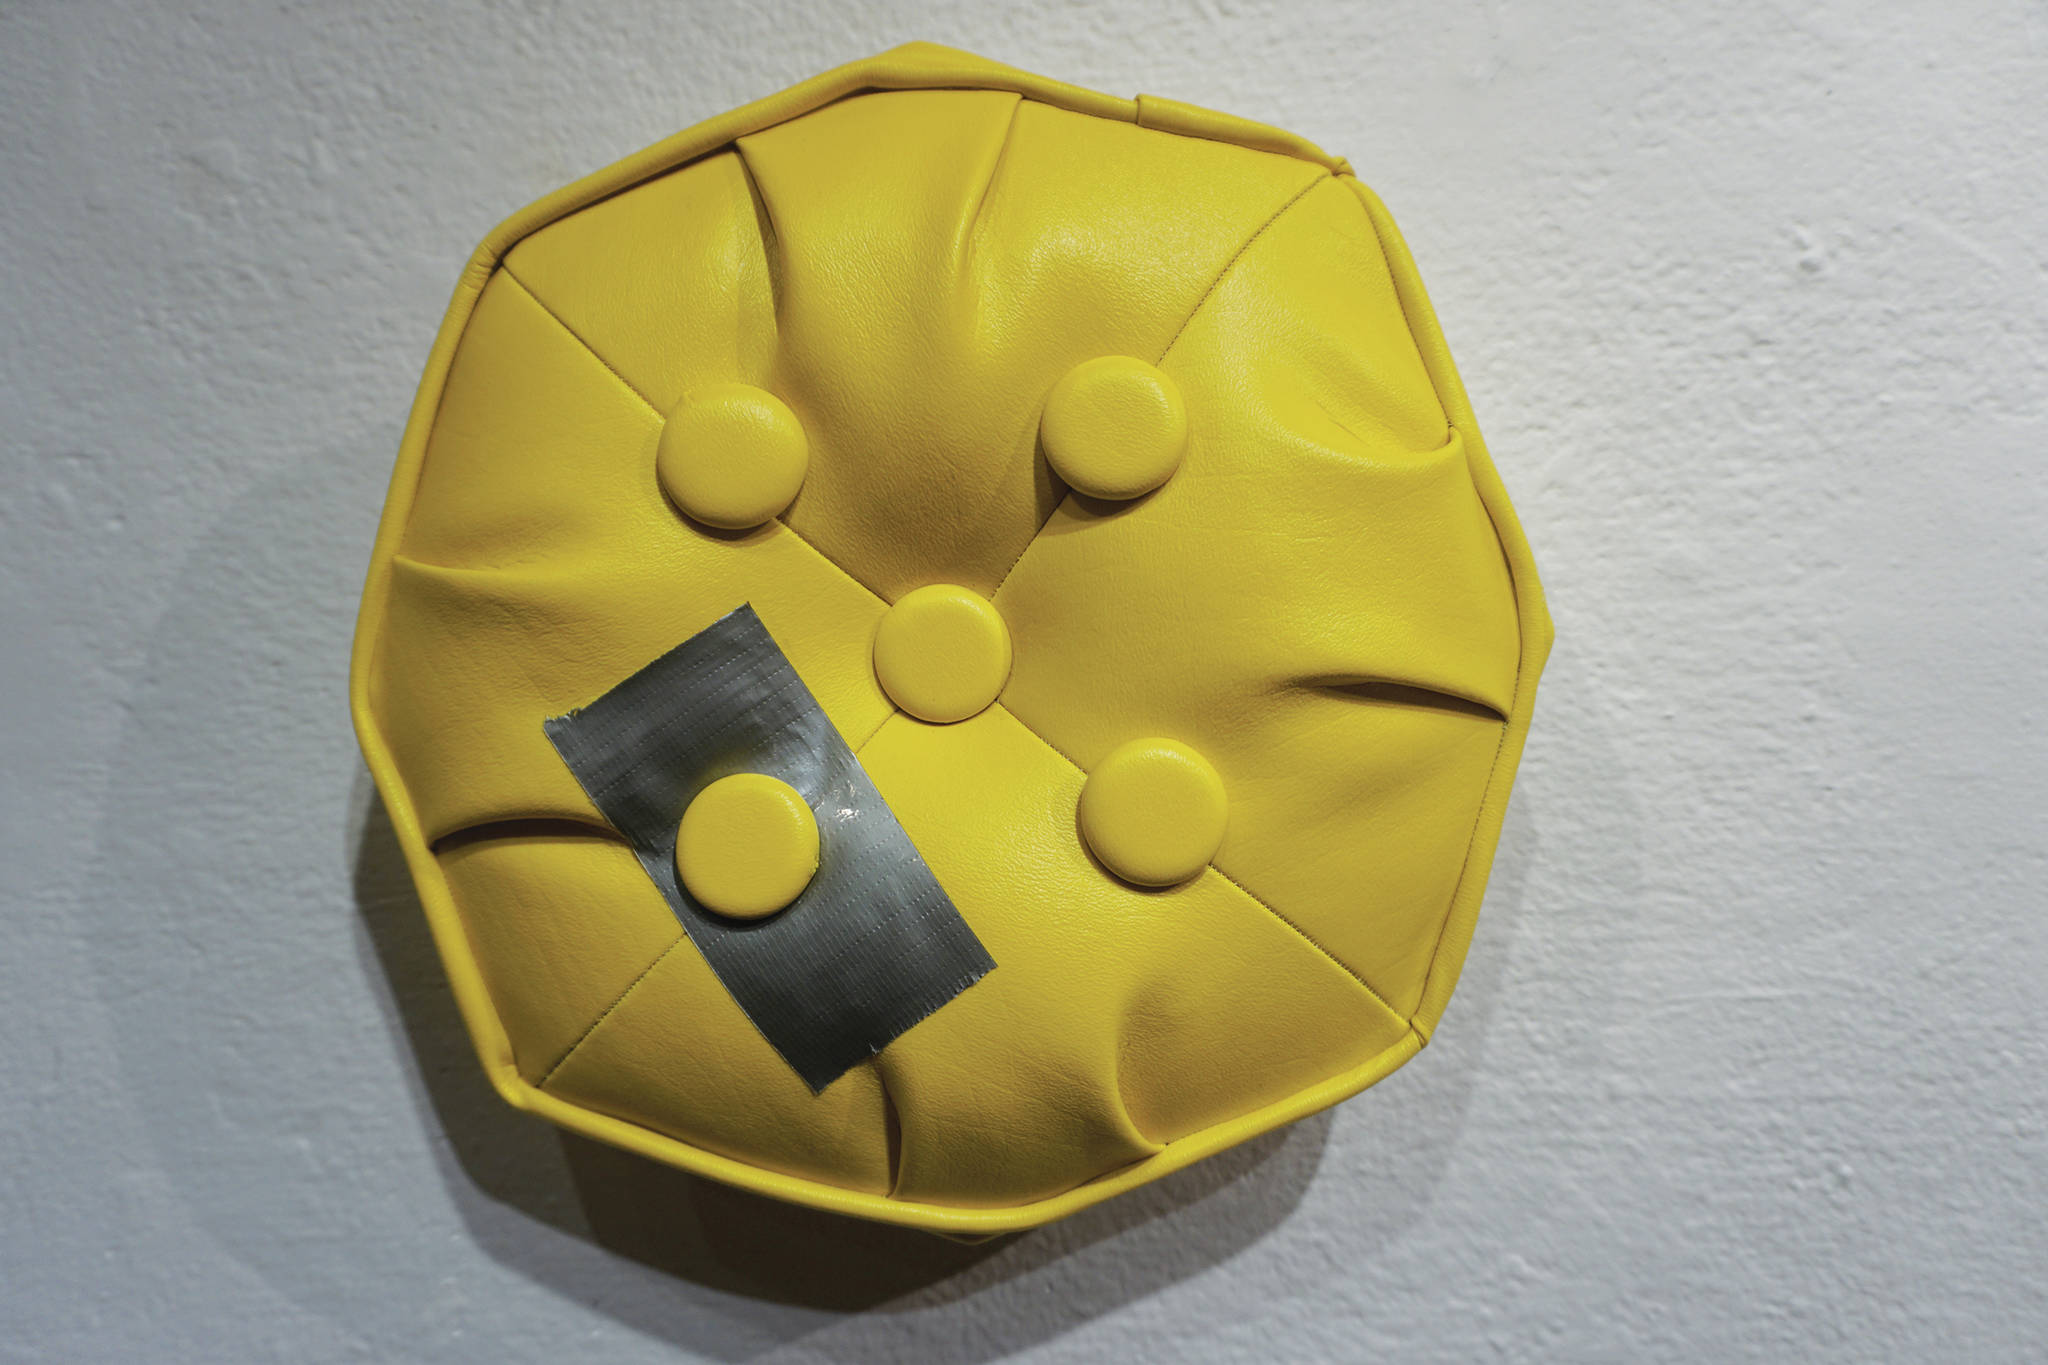 Tamara Wilson’s “Yellow Tough,” as seen at the First Friday opening on Feb. 15, 2020, of her show, “Macaroni and Cheese,” at Bunnell Street Arts Center in Homer, Alaska. (Photo by Michael Armstrong/Homer News)